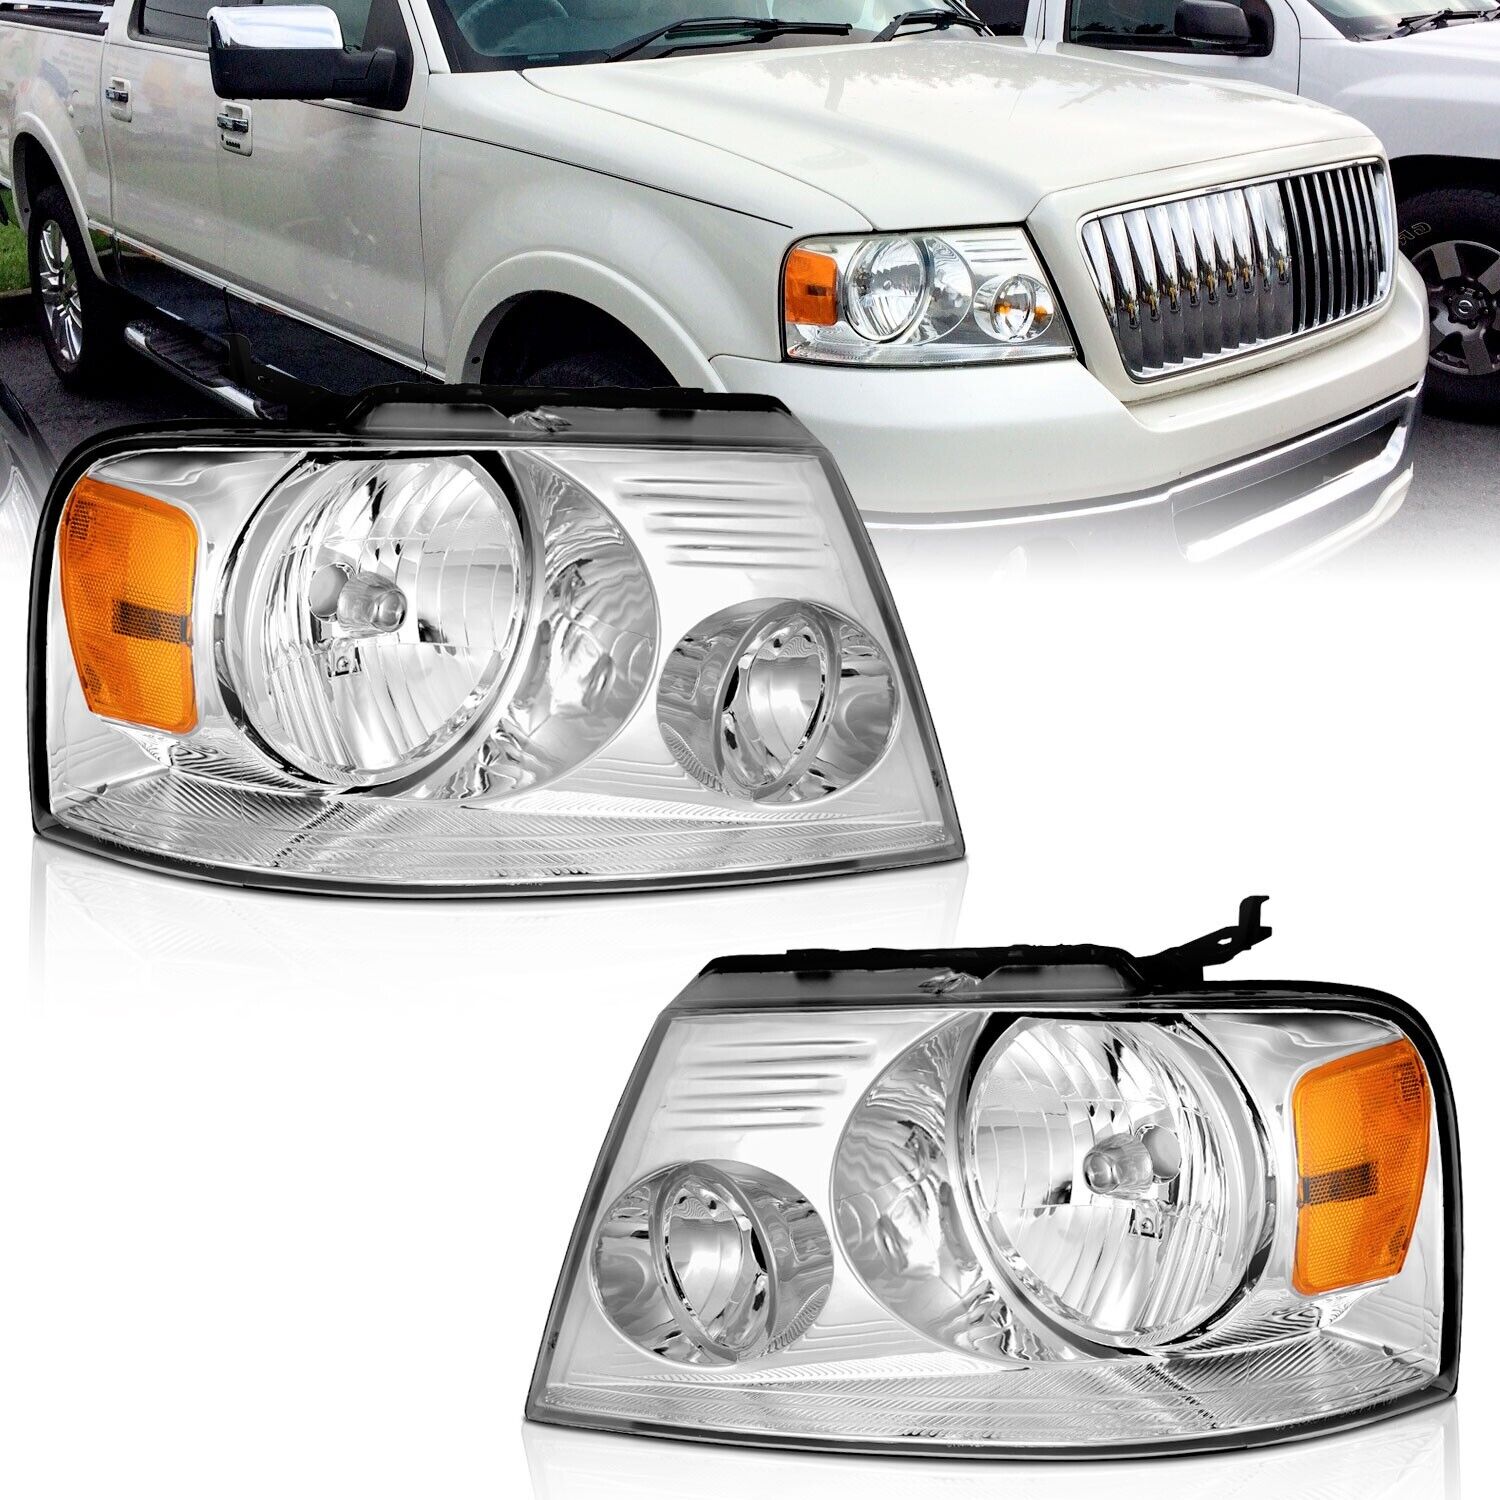 WEELMOTO For 2004-2008 Ford F-150 F150 Chrome Headlights Assembly Pair Lamps